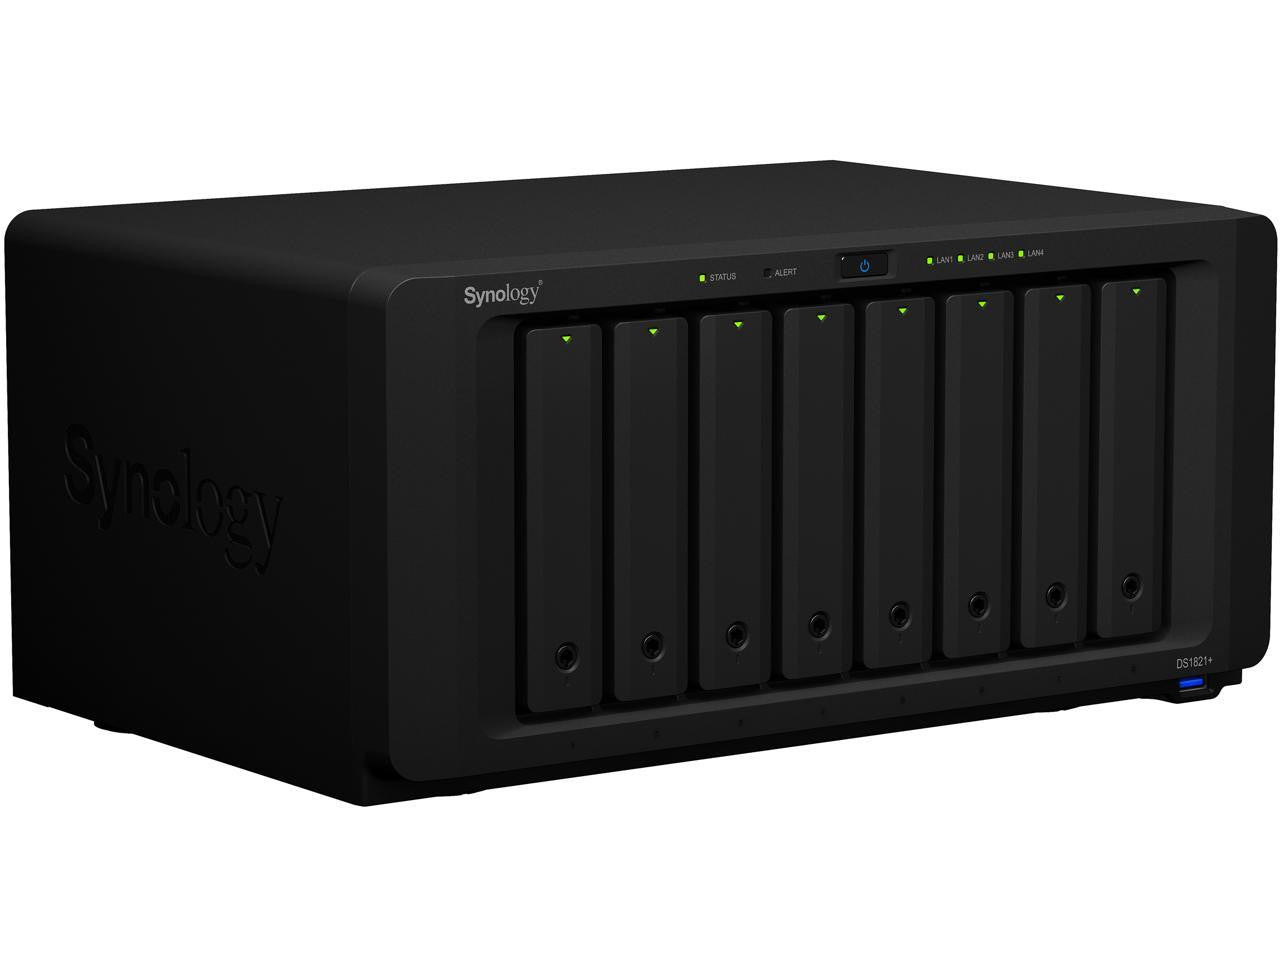 Synology DS1821+ 8-BAY DiskStation with 16GB Synology RAM and 96TB (8x12TB) Western Digital RED PLUS Drives Fully Assembled and Tested